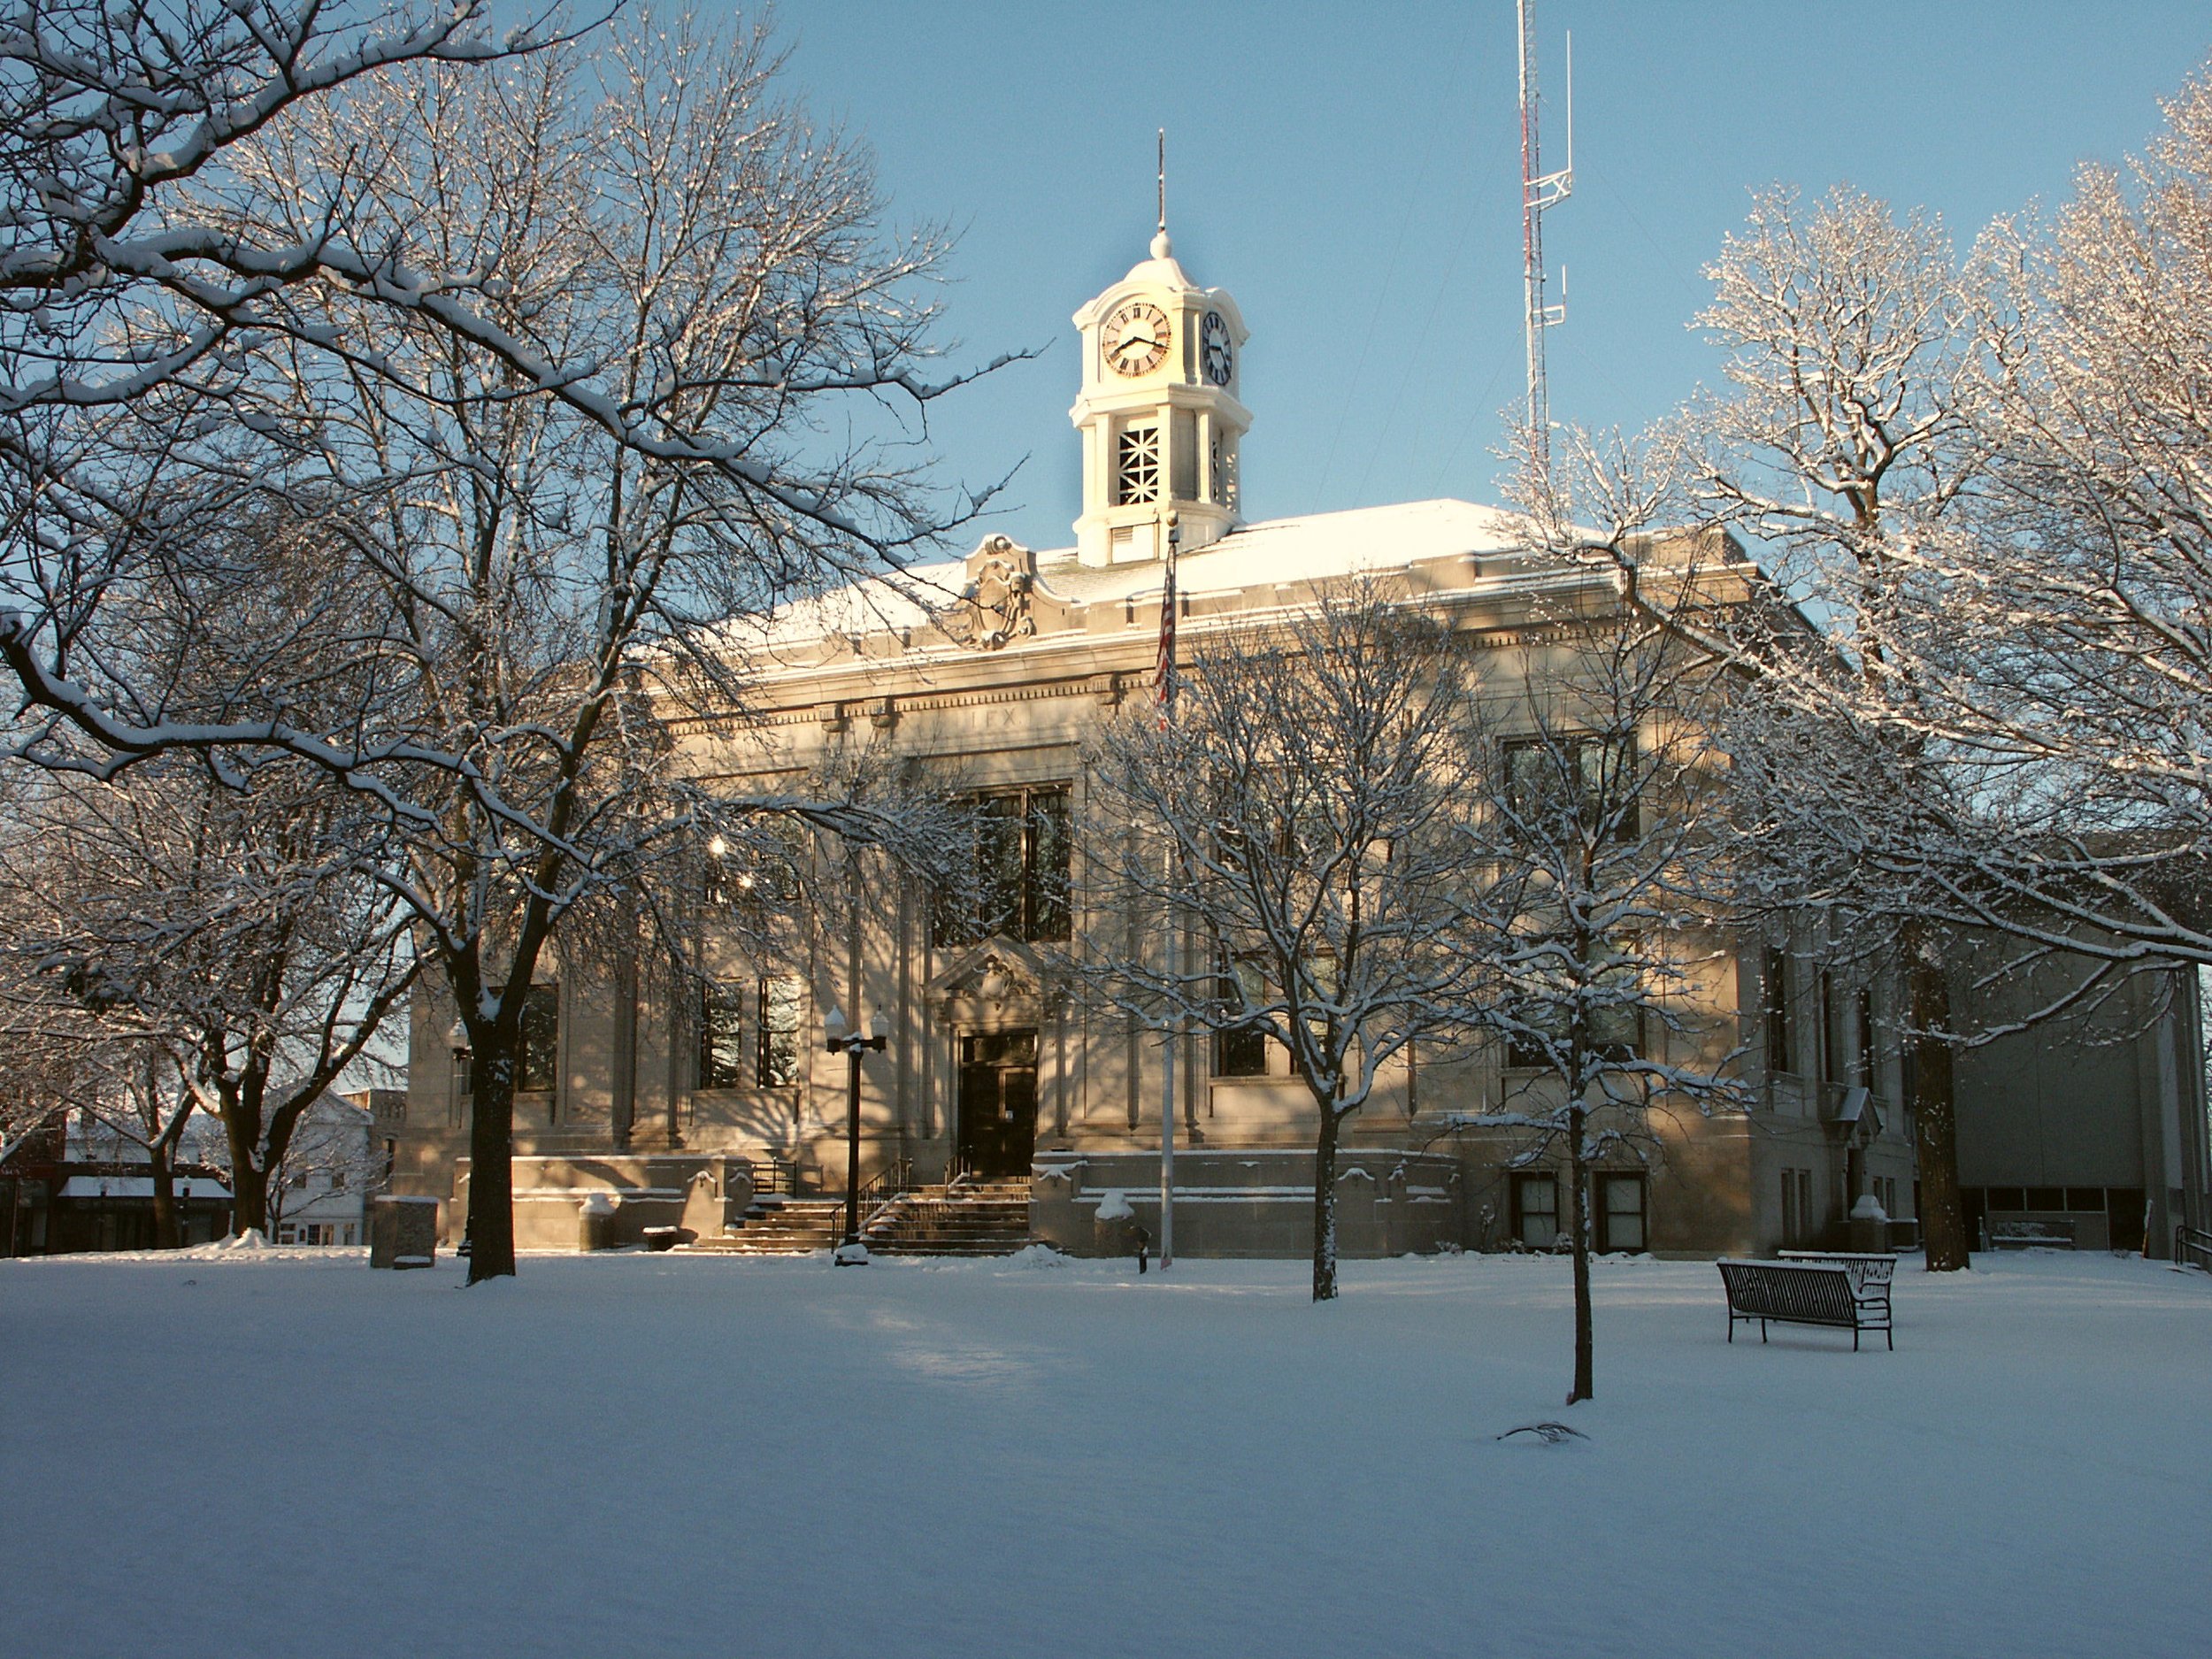 Snowy Courthouse 1, 1-06